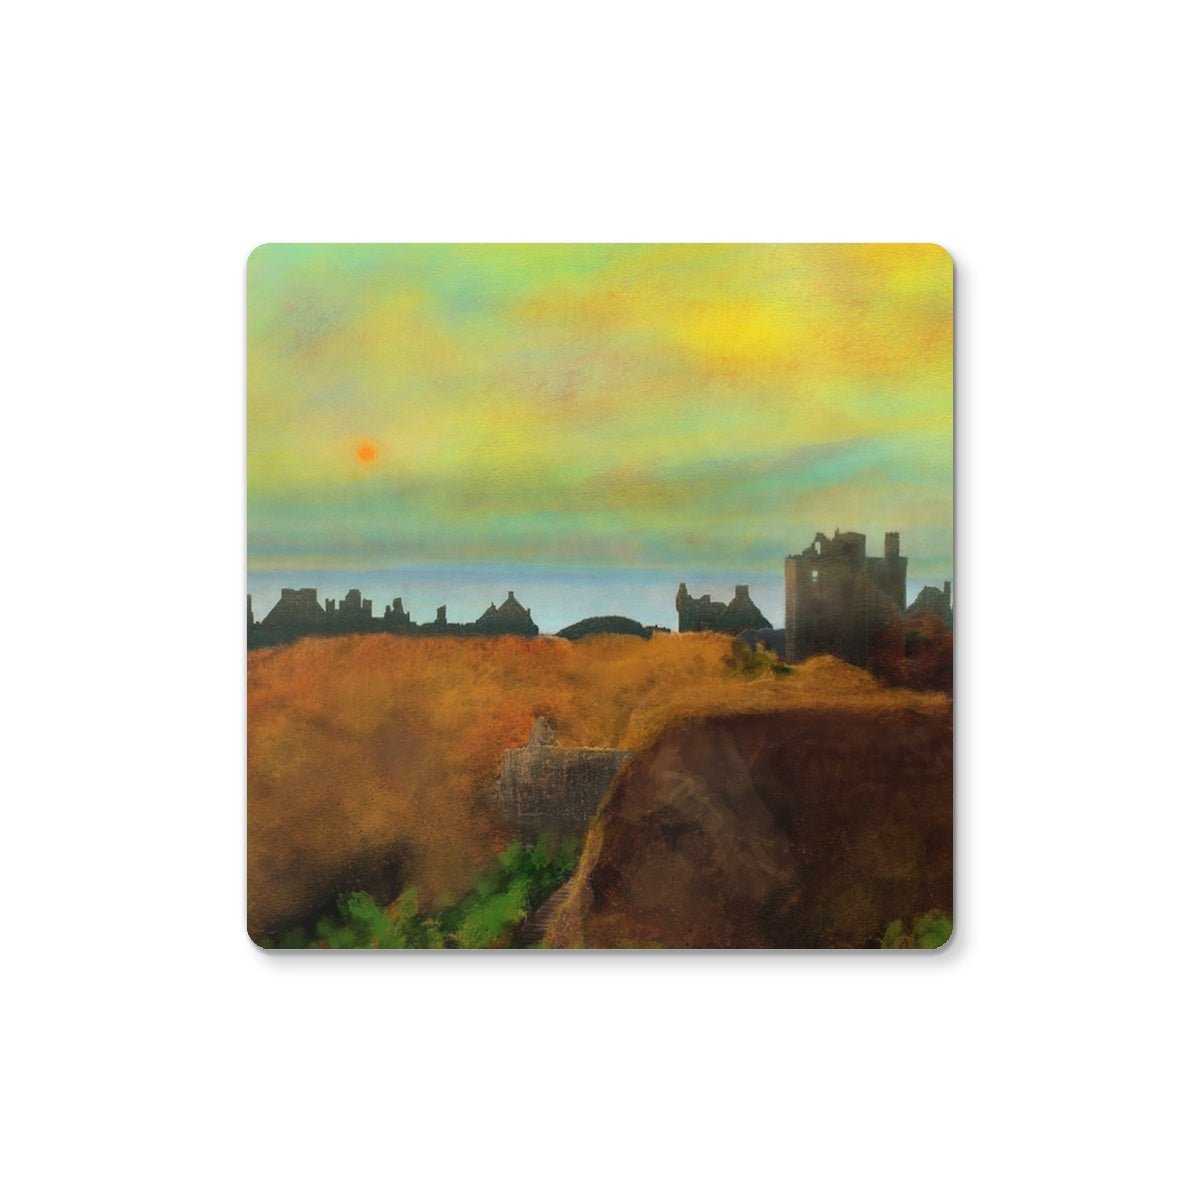 Dunnottar Castle Dusk Art Gifts Coaster-Coasters-Historic & Iconic Scotland Art Gallery-Single Coaster-Paintings, Prints, Homeware, Art Gifts From Scotland By Scottish Artist Kevin Hunter